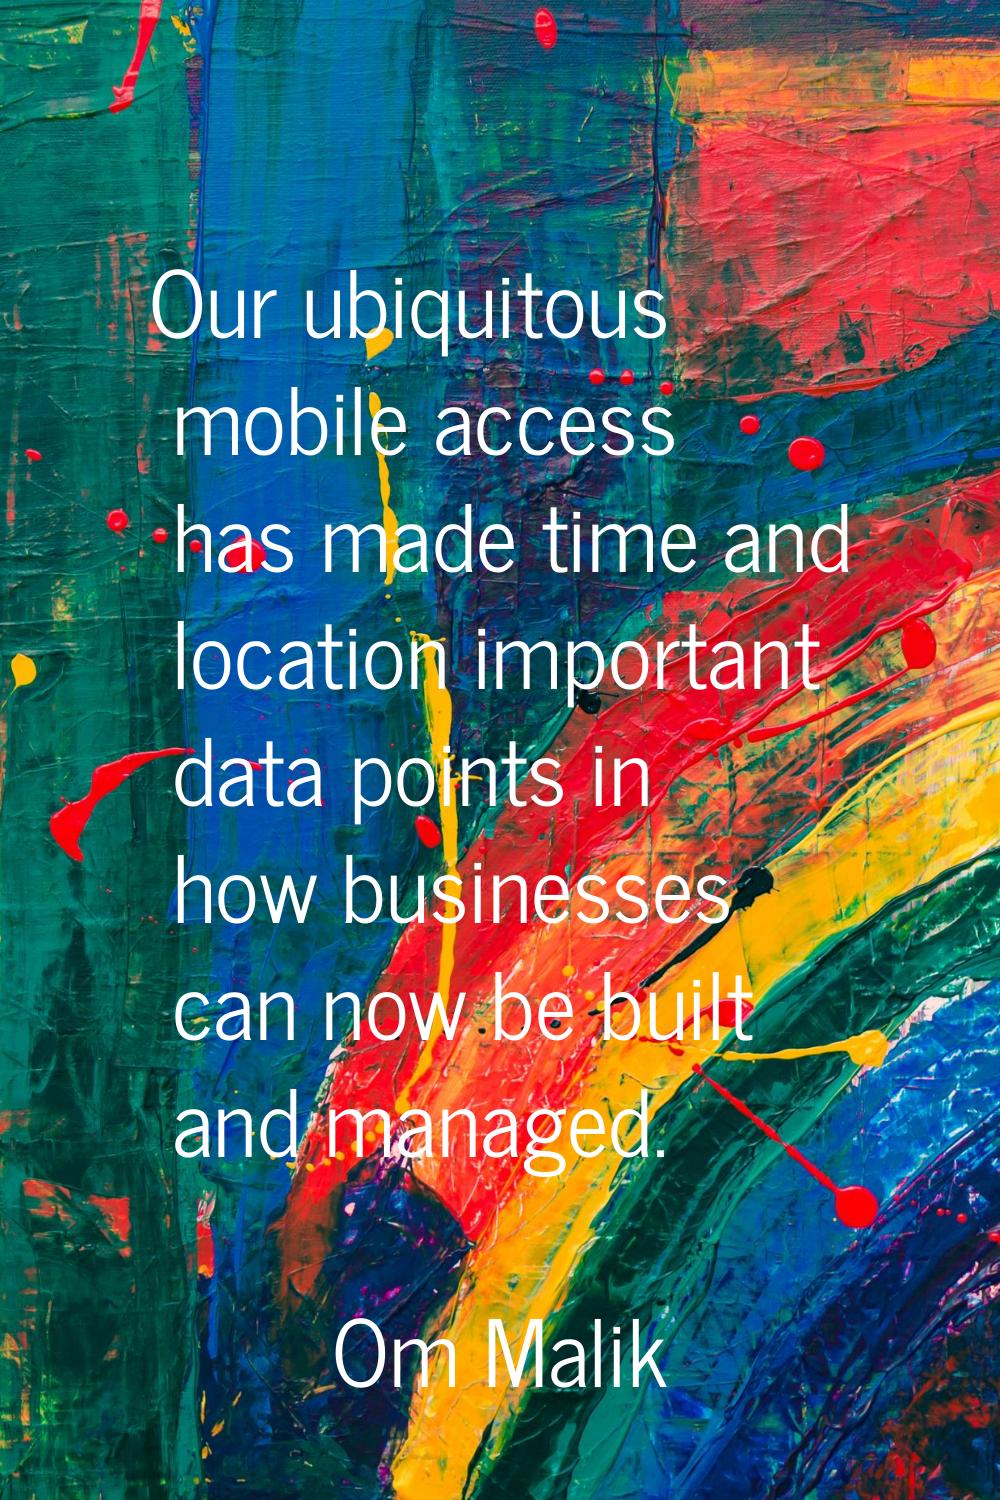 Our ubiquitous mobile access has made time and location important data points in how businesses can